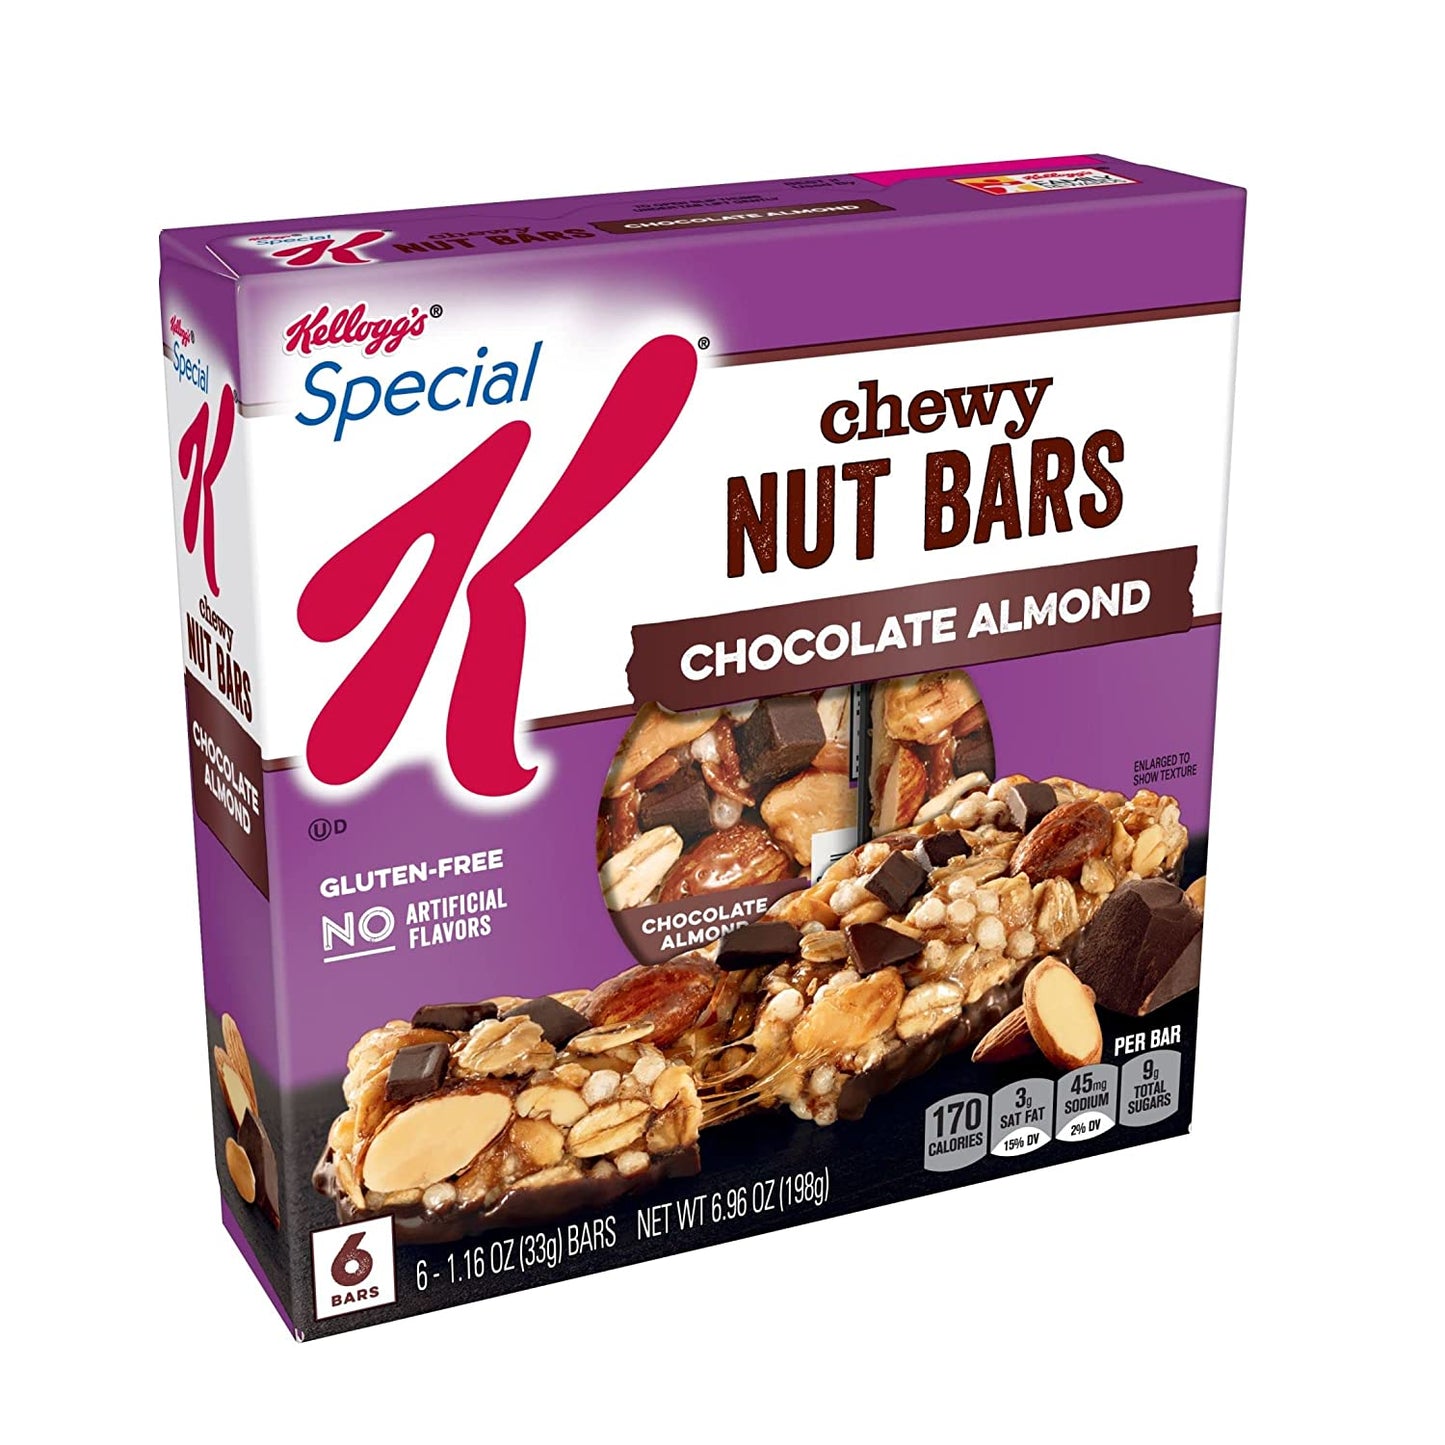 Kellogg's Special K Chewy Breakfast Bars, Gluten Free Snacks, 170 Calories Per Bar, Chocolate Almond (8 Boxes, 48 Bars)